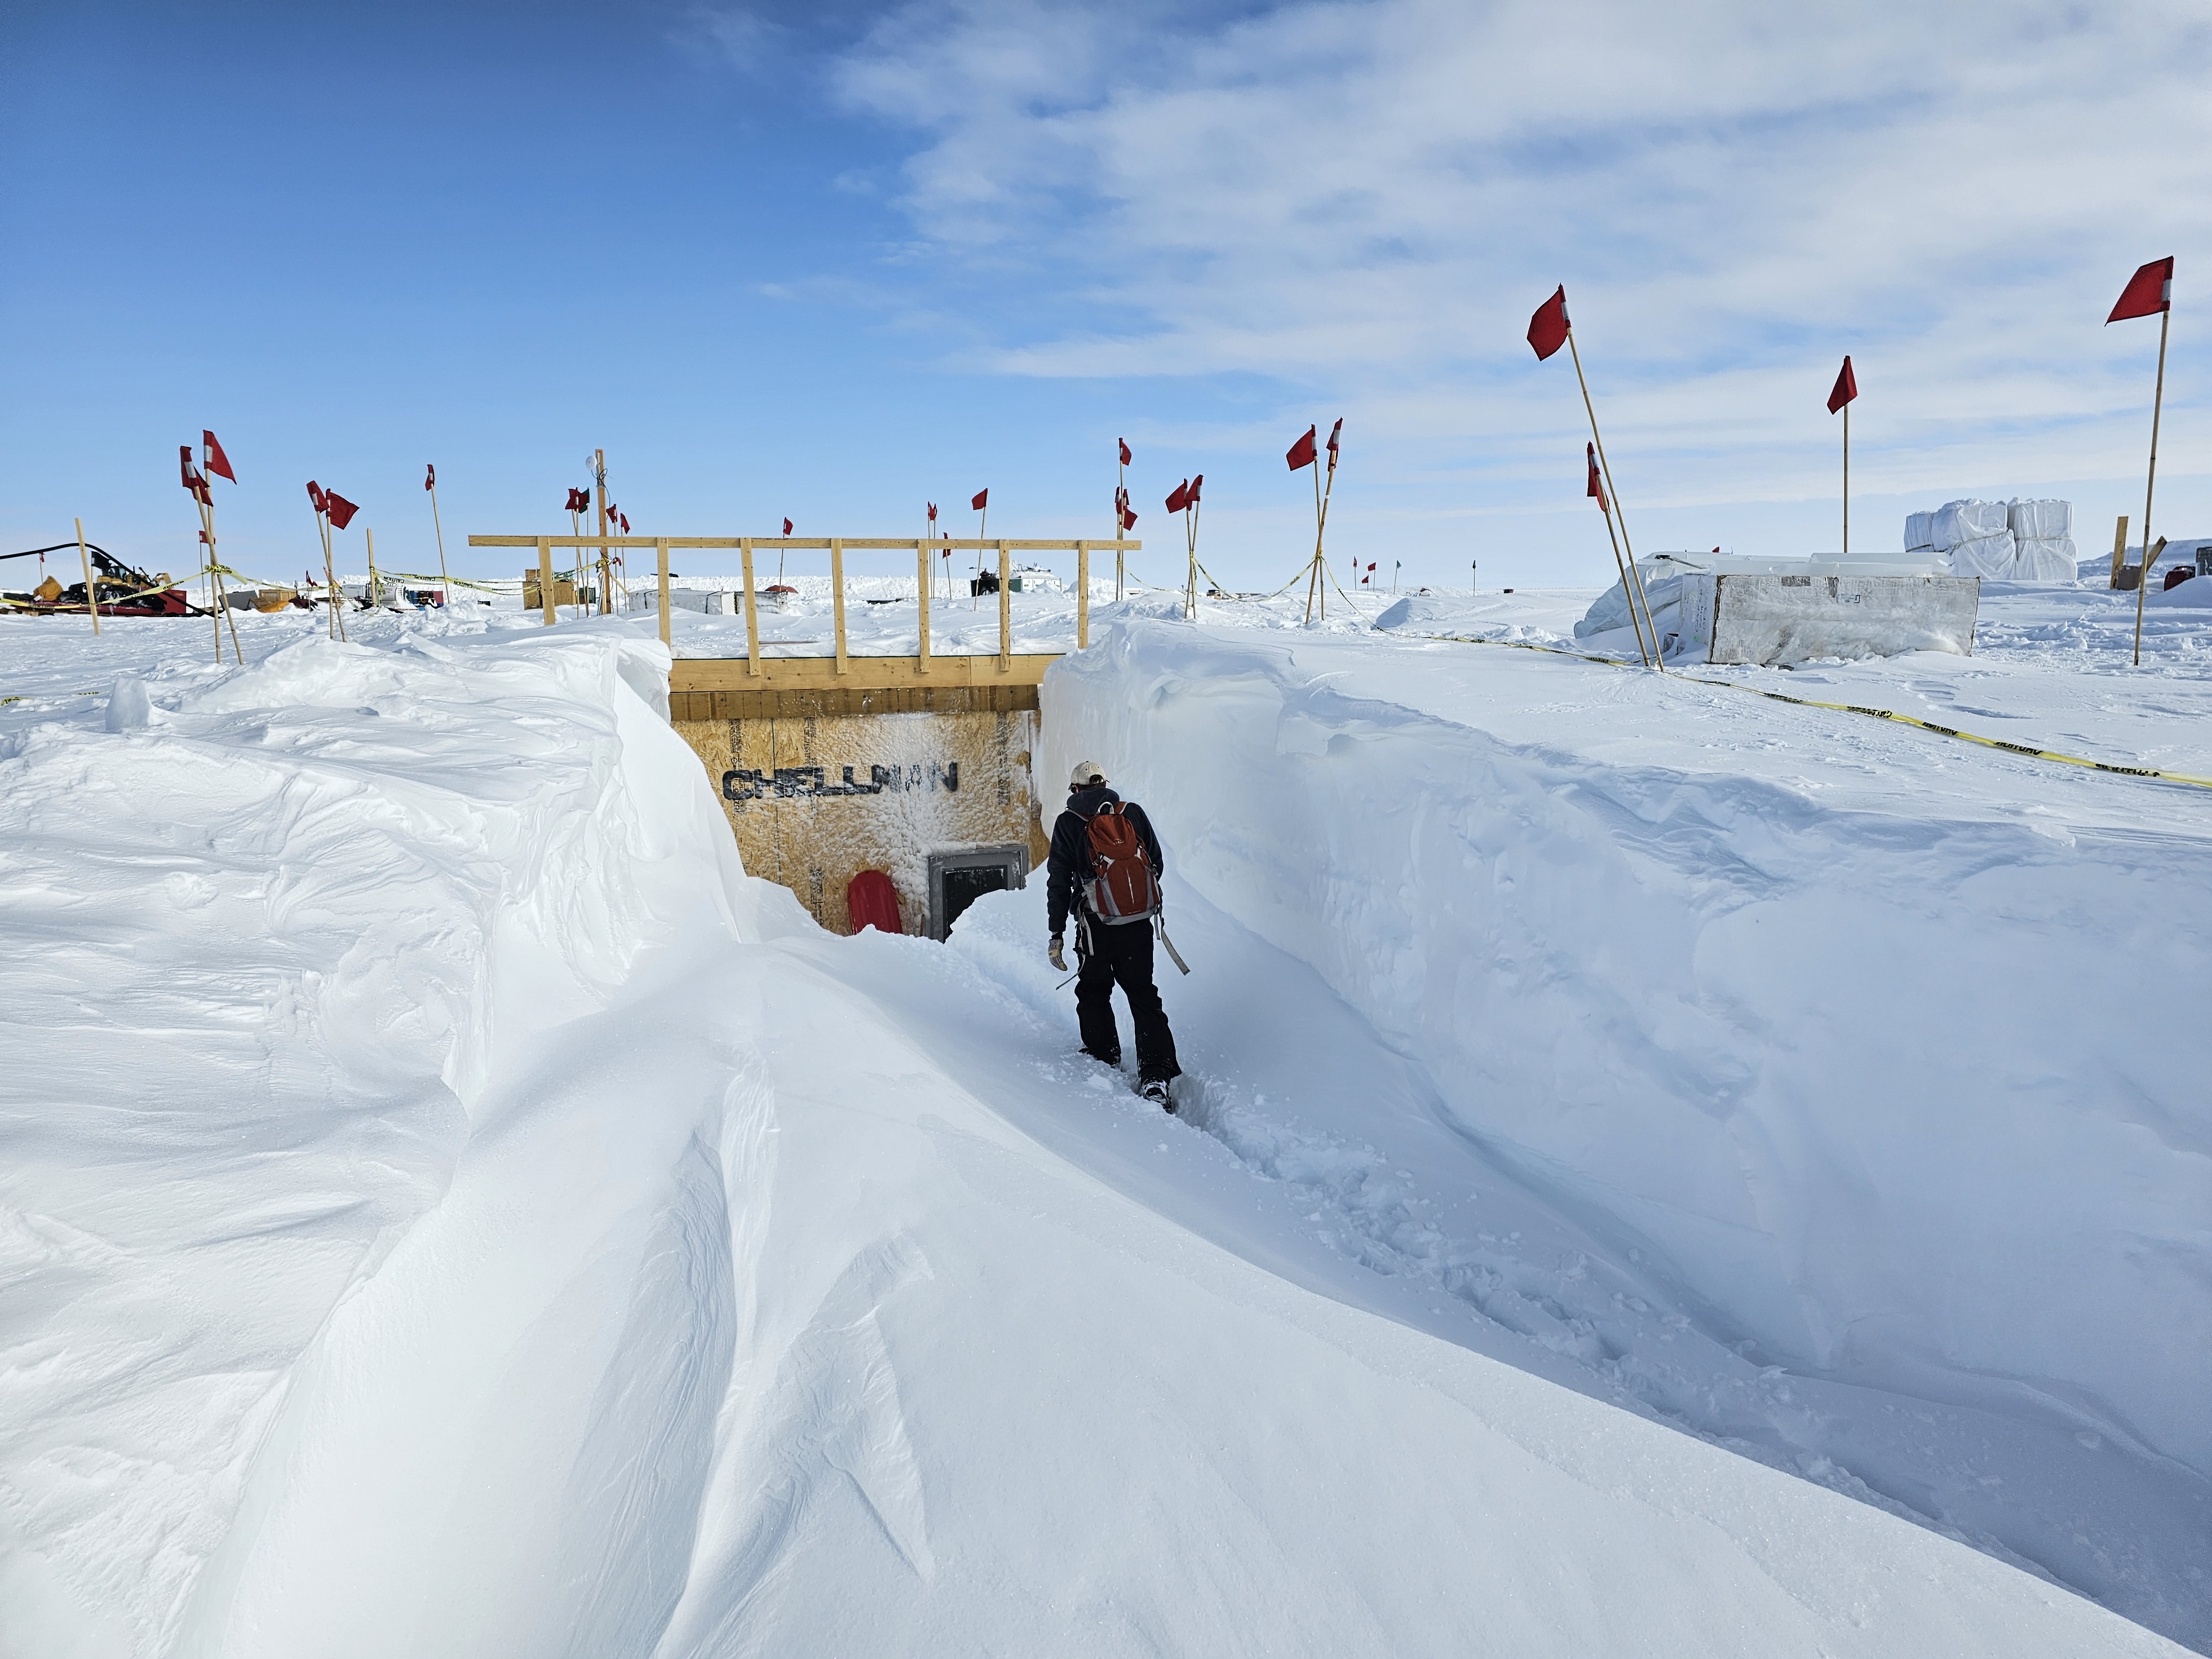 Nathan Chellman walking into the research trench over drifted snow.